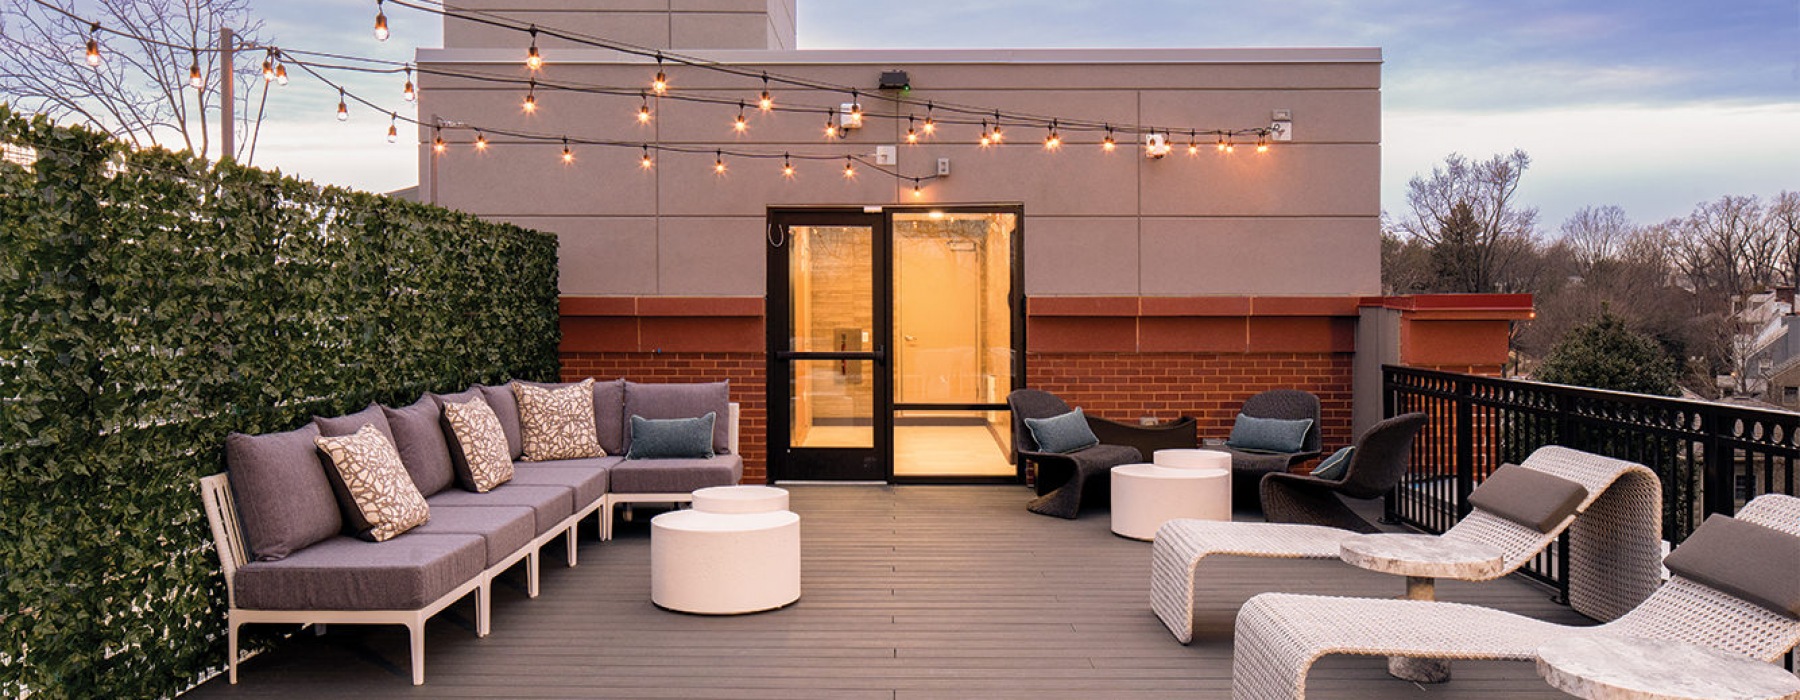 a roof deck with lounge seating